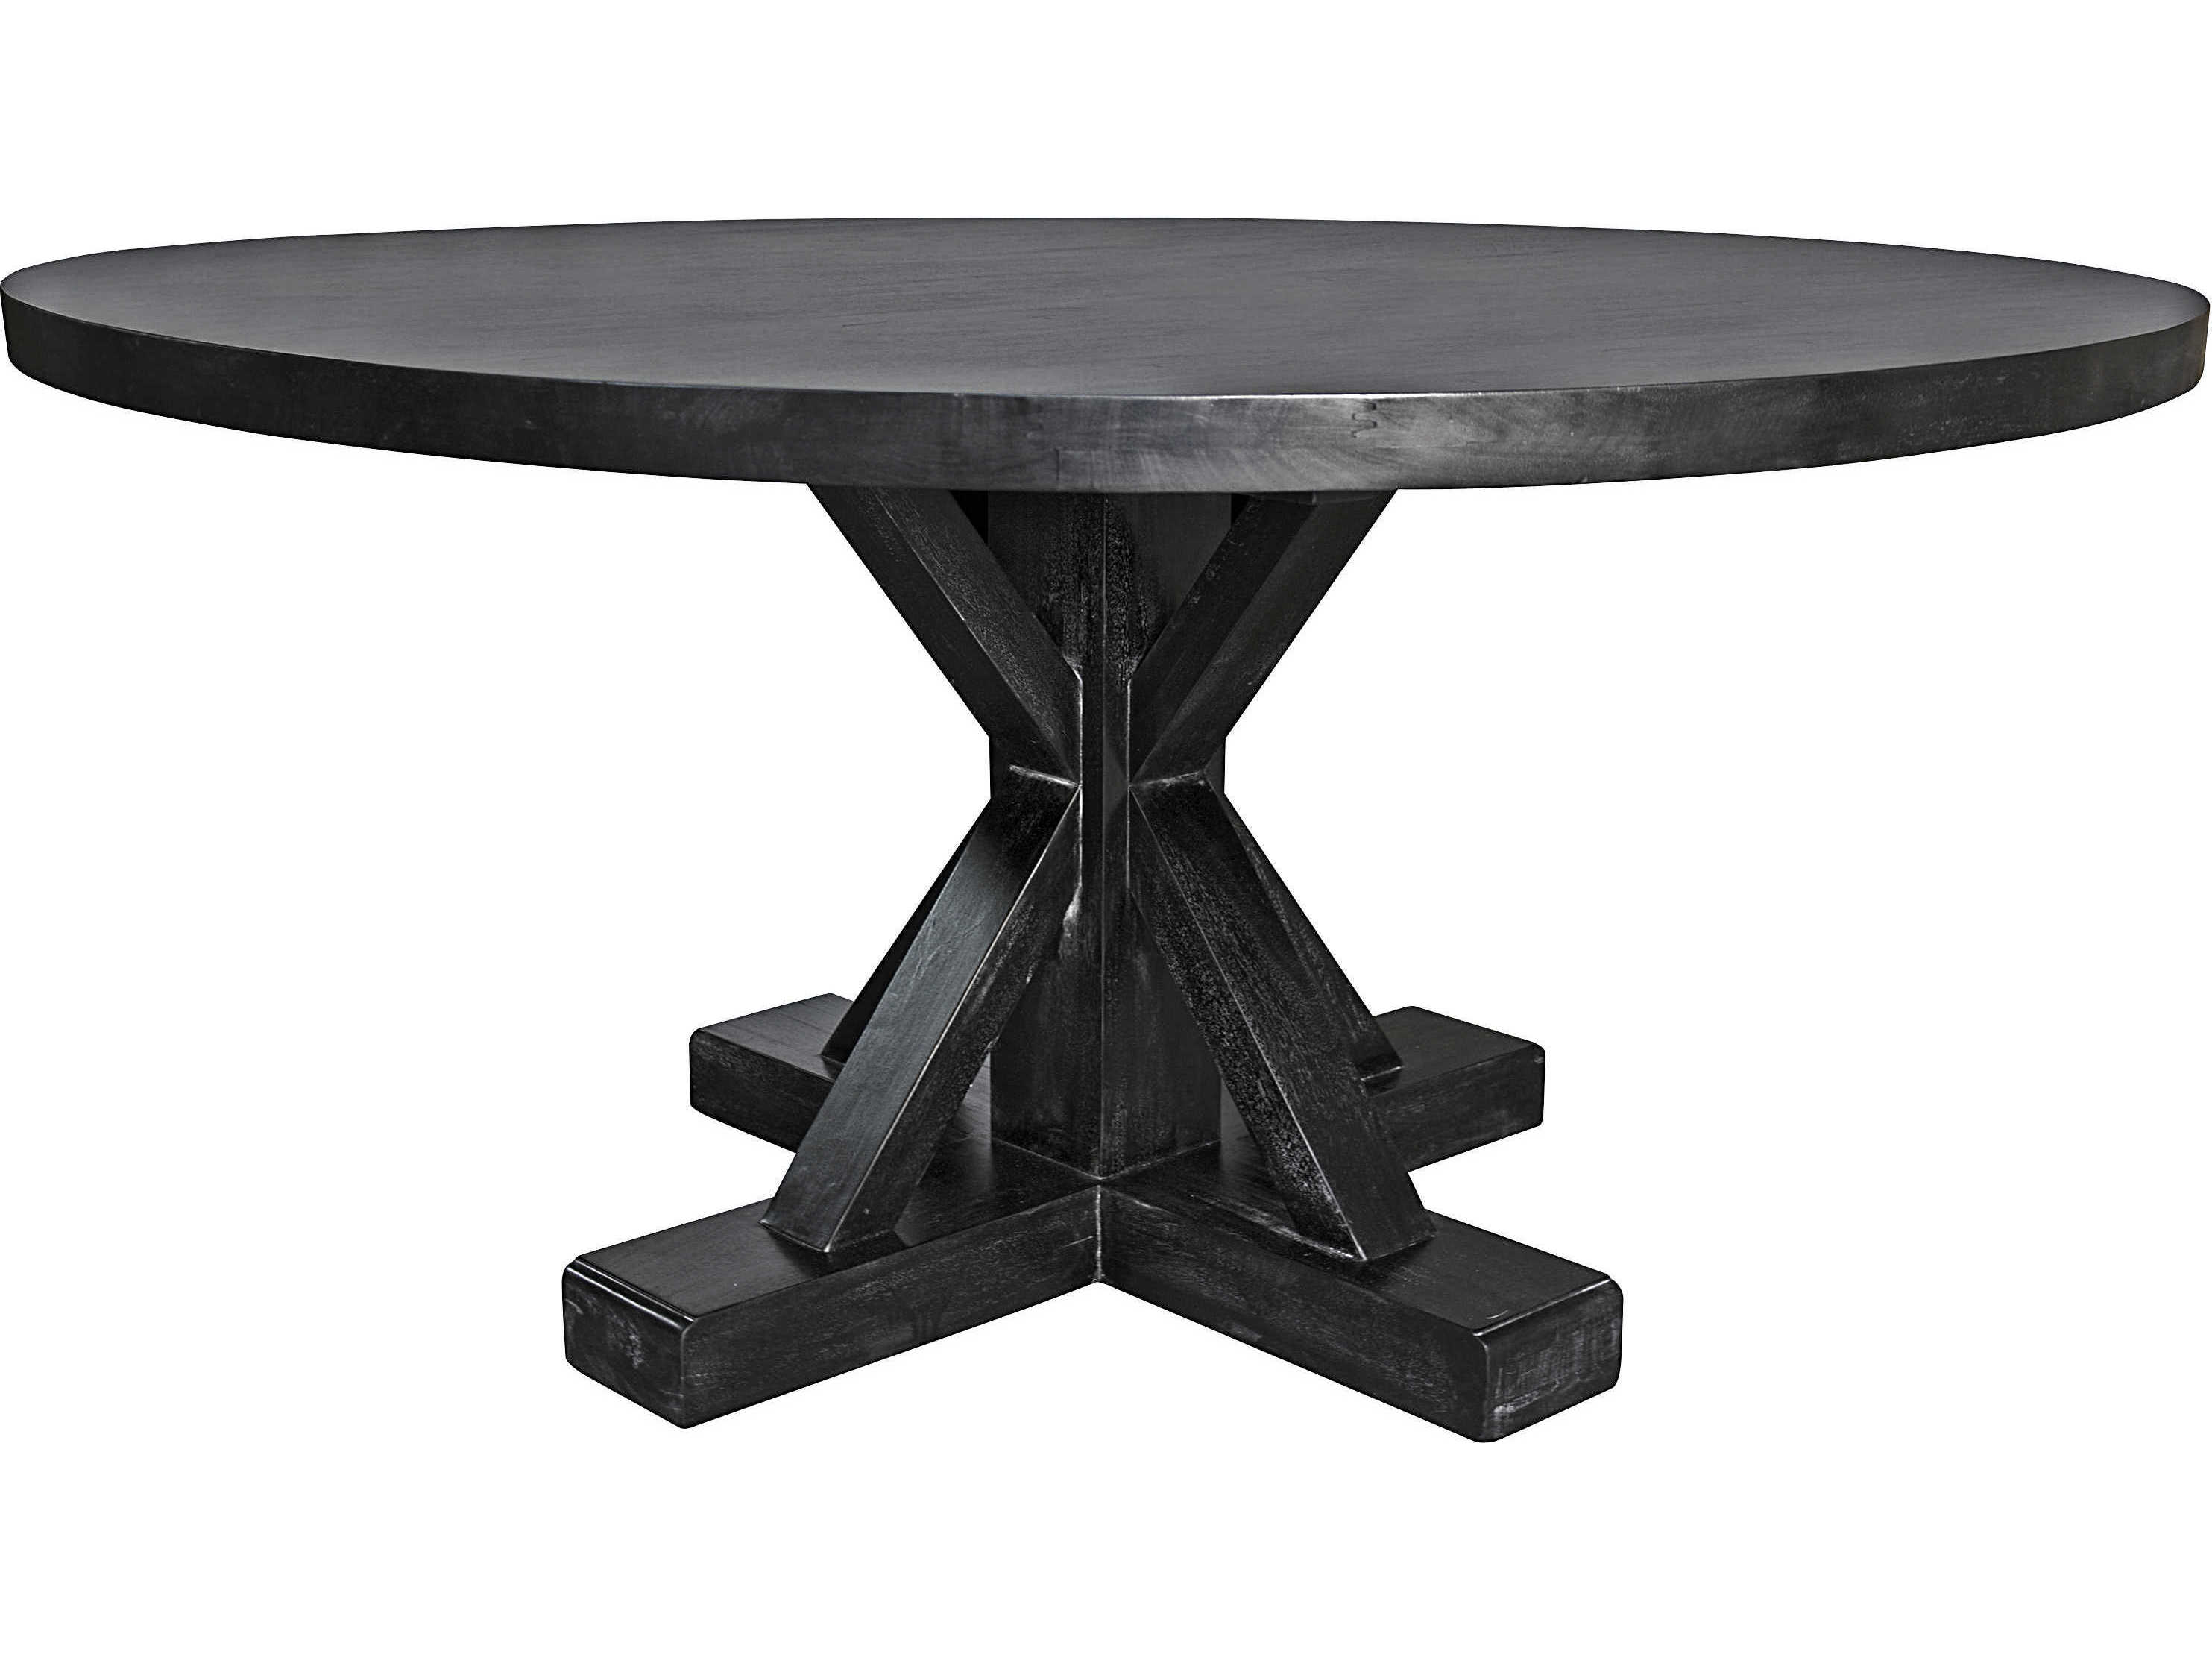 60 Round Black Dining Room Table